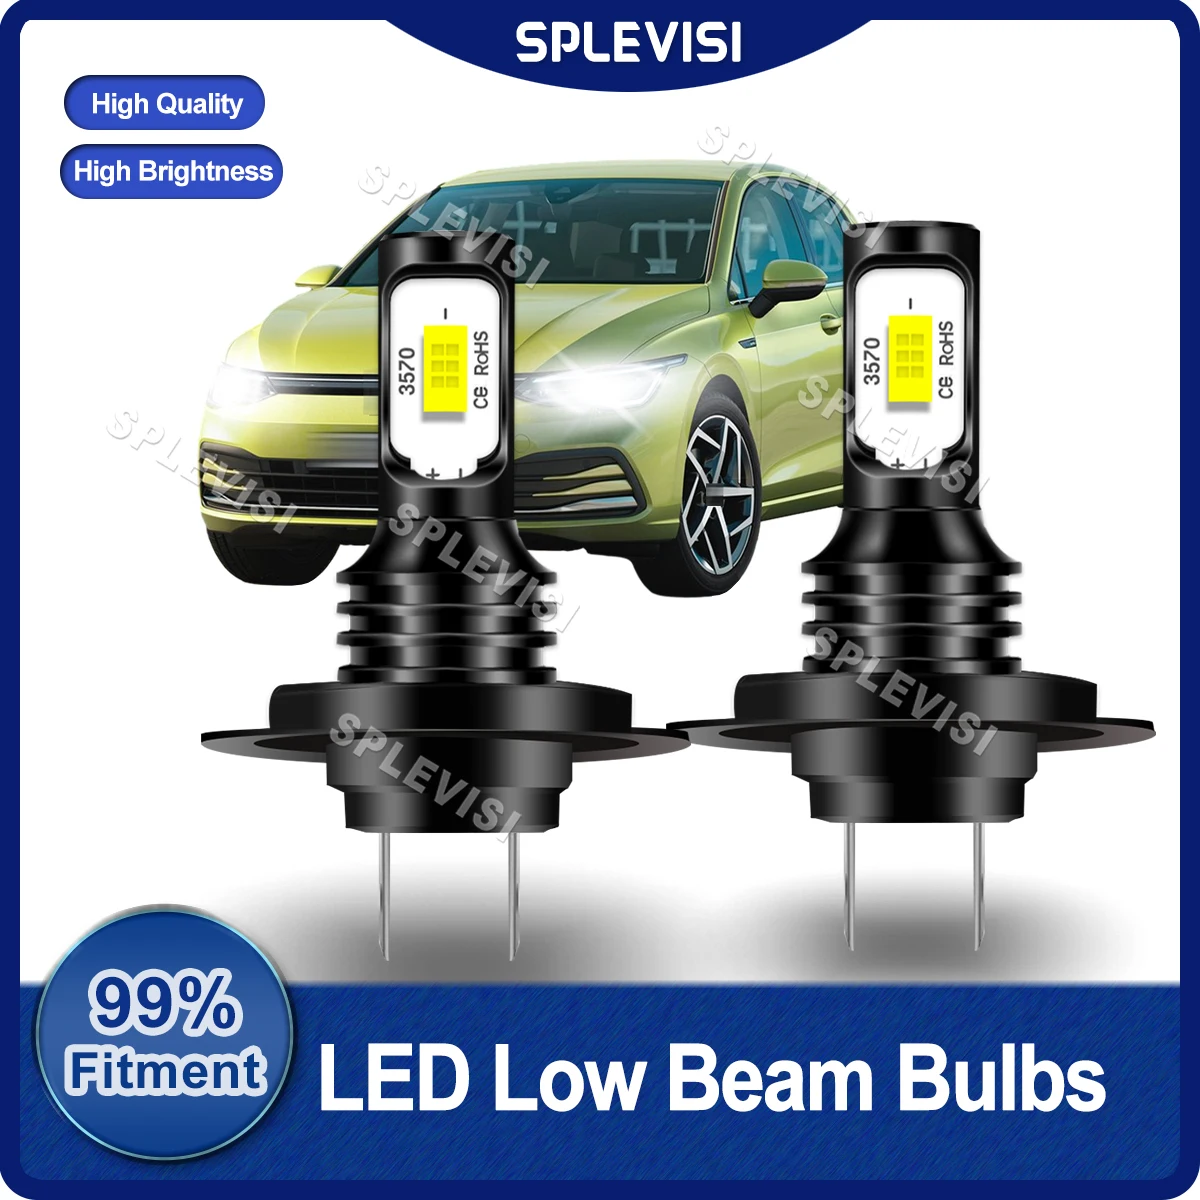 

SPLEVISI LED Headlight H7 Low Beam Compatible For VW Golf MK7 2013 2014 2015 2016 2017 2018 2019 2020 Replace Front Light